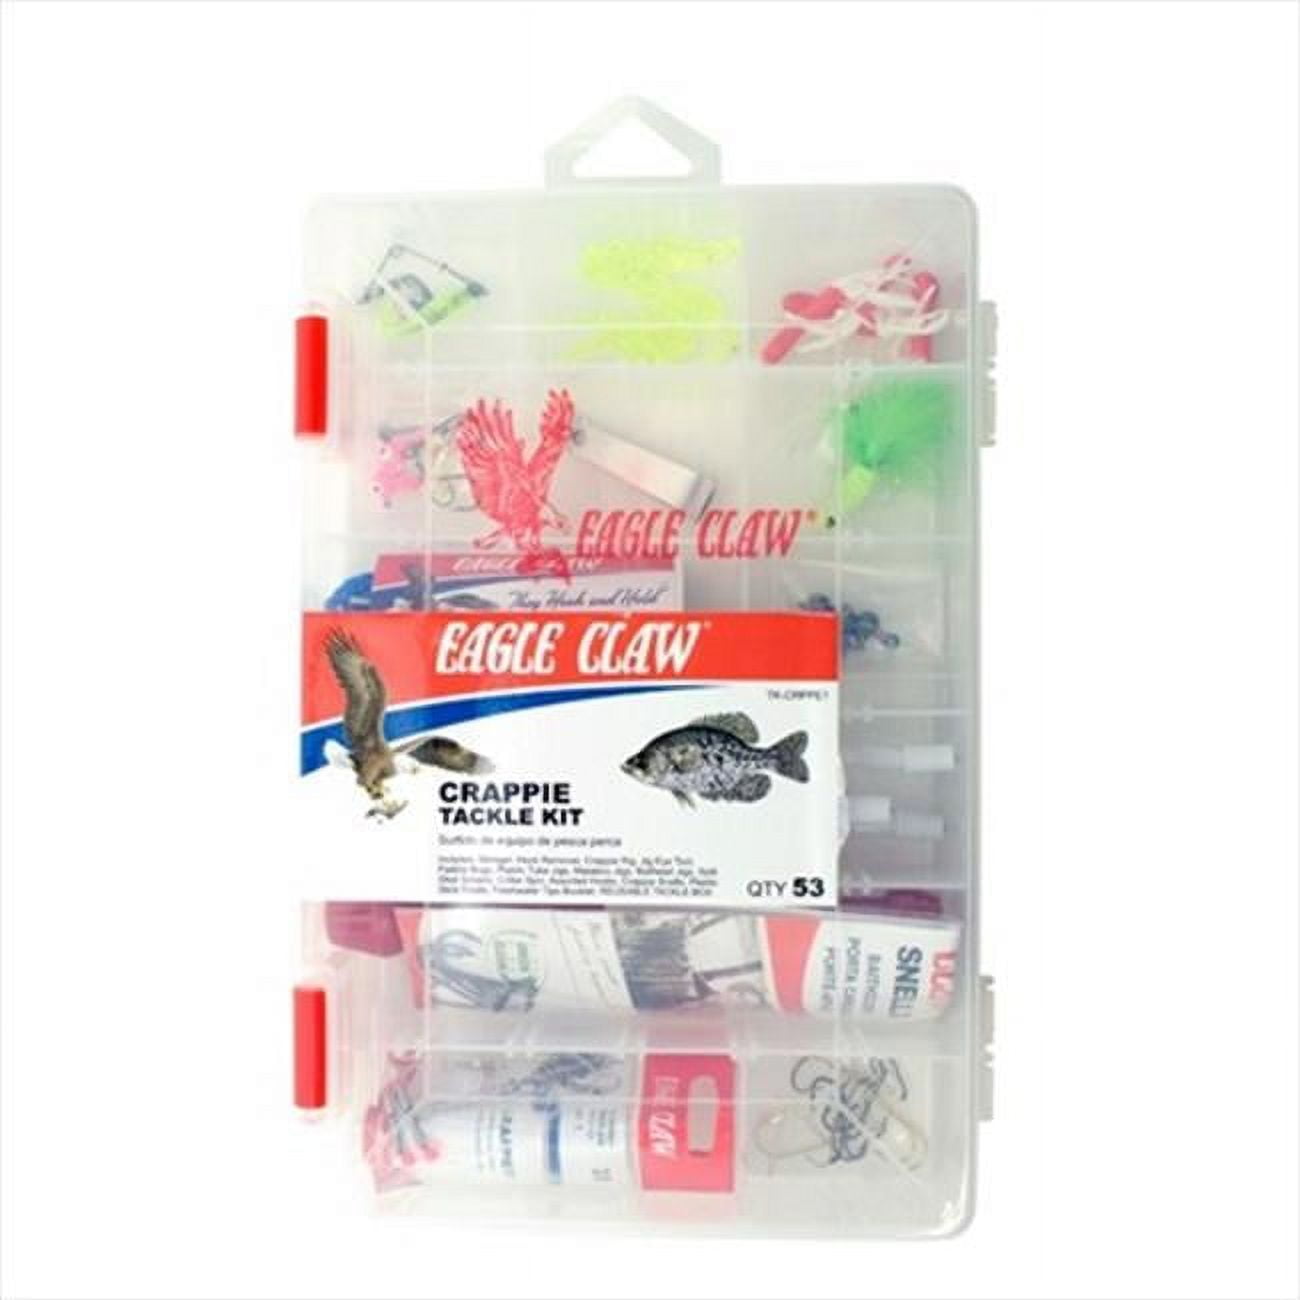 Eagle Claw Crappie Tackle Kit with Utility Box - 53 Essential Pieces for Crappie  Fishing - Multi-color - 11in.L x 1.75in.W x 7.25in.H 